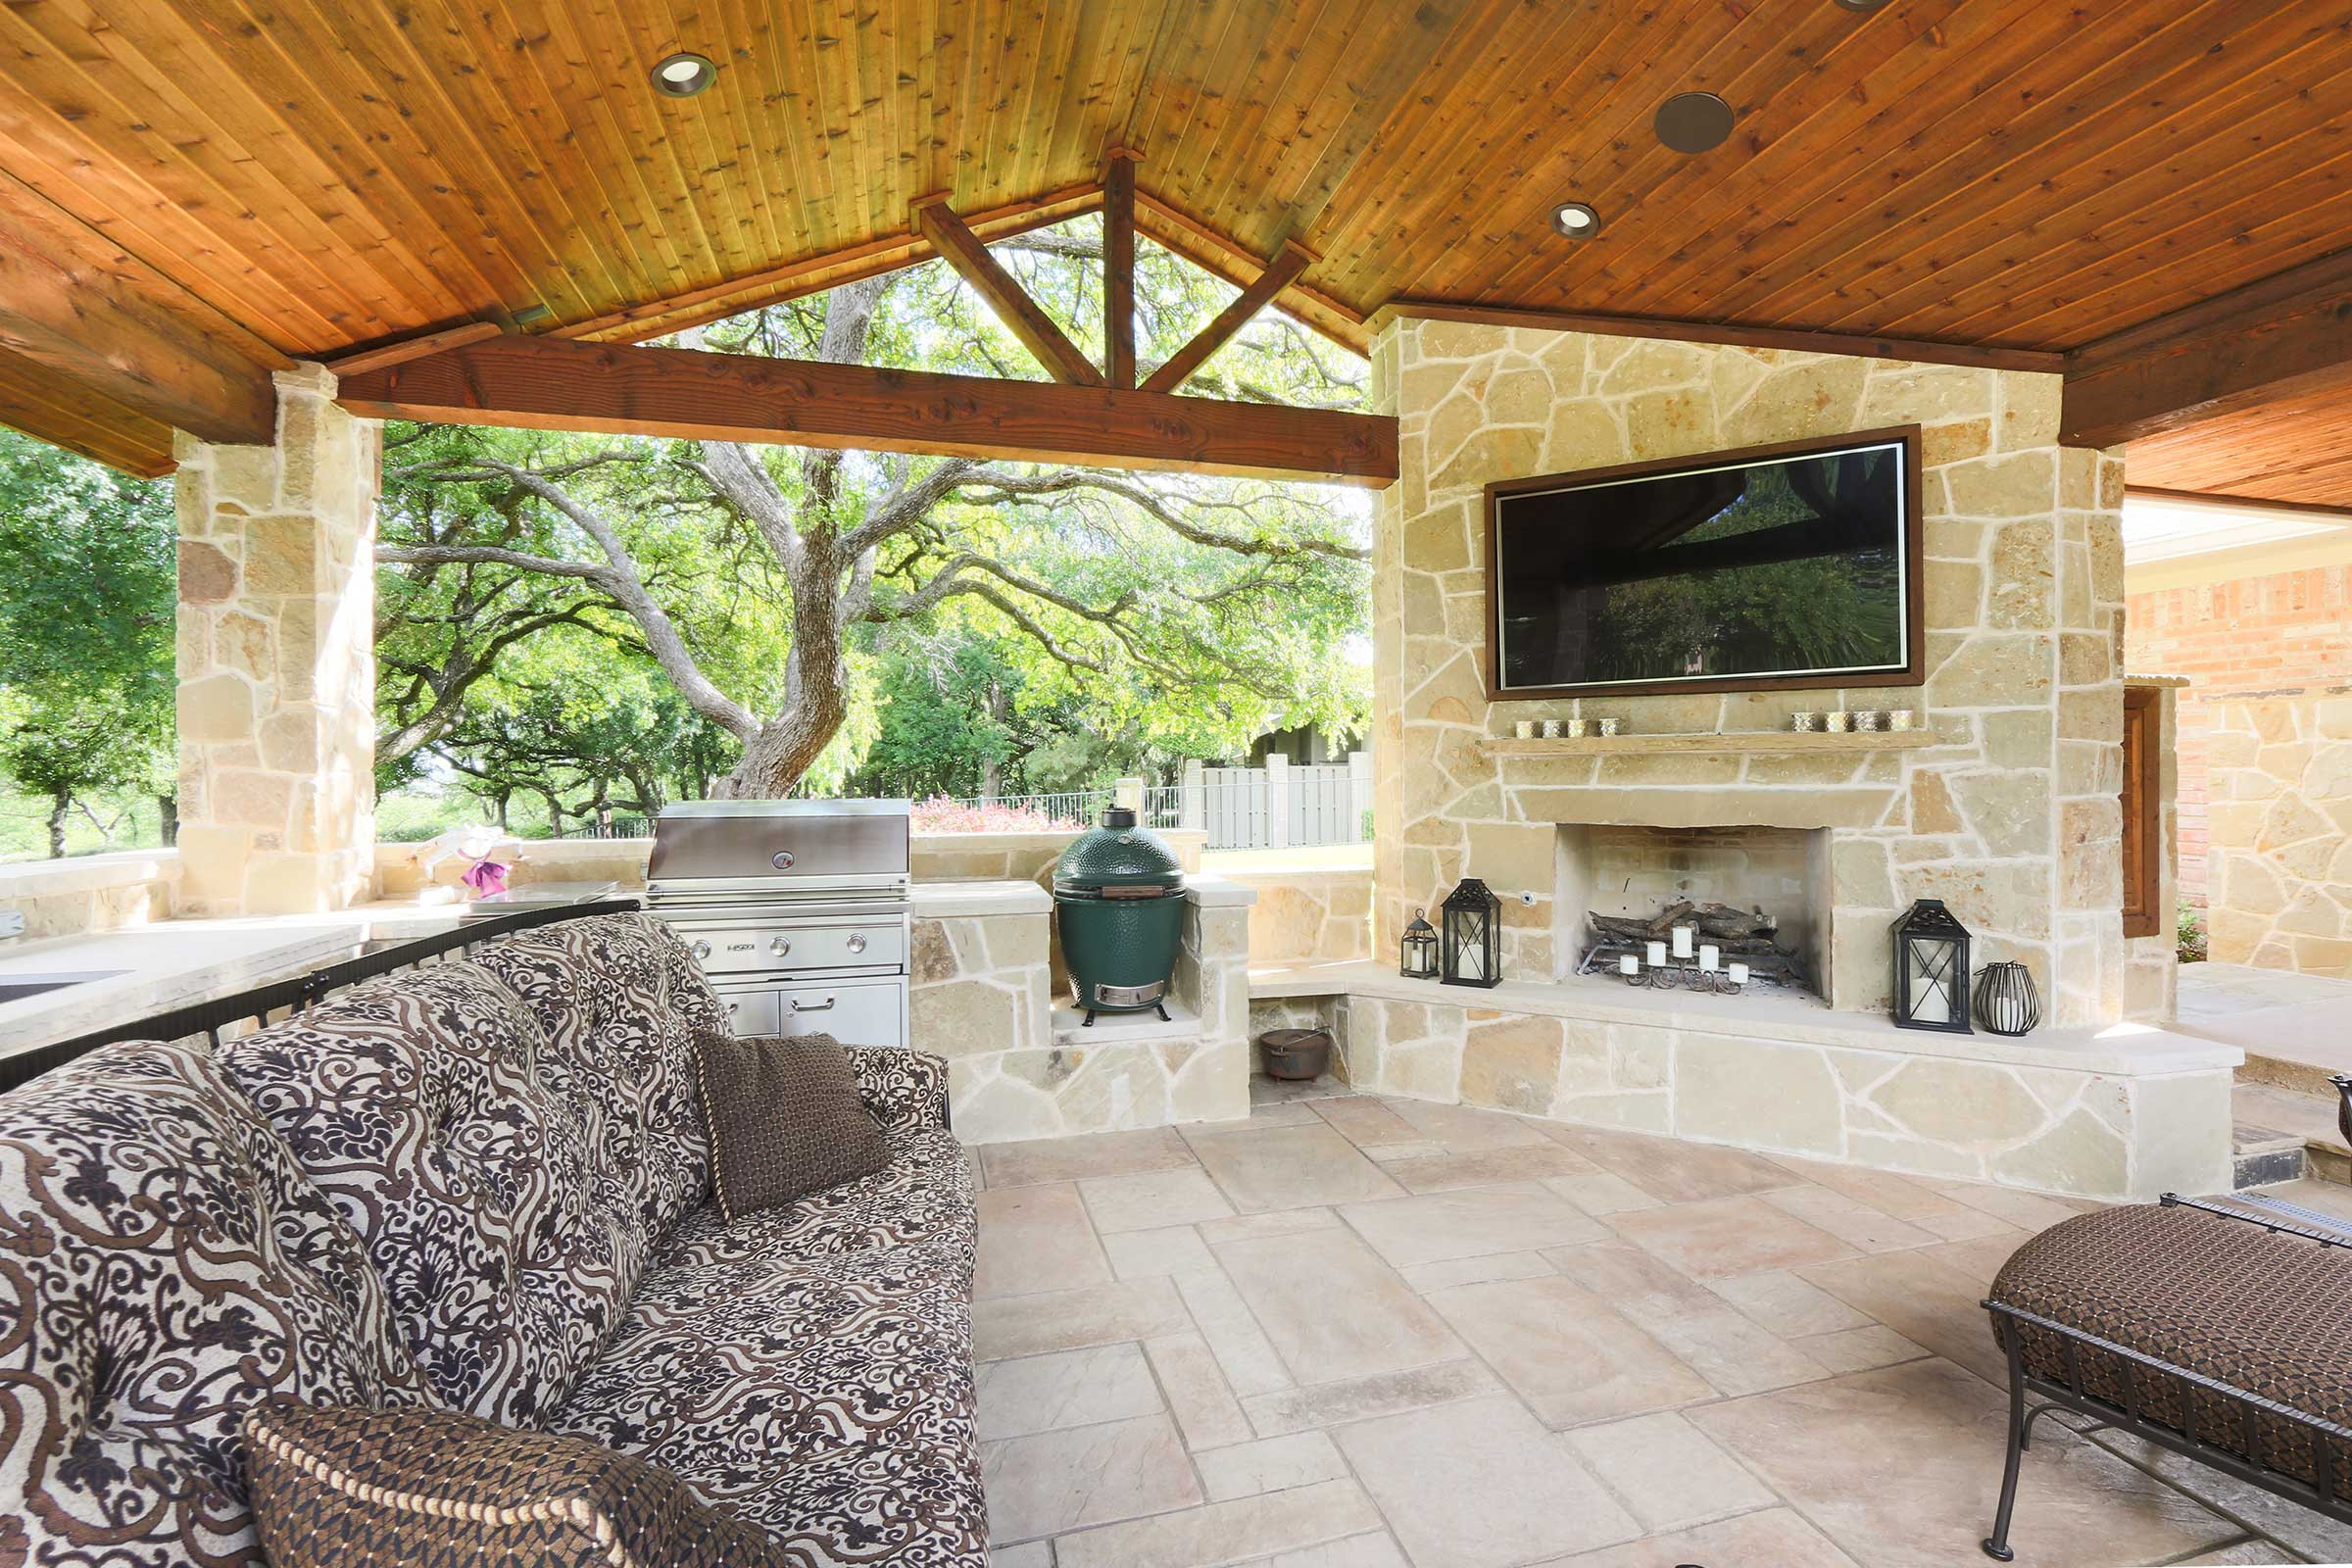 Outdoor Kitchens With Fireplace
 Outdoor Kitchens Colleyville Burleson TX